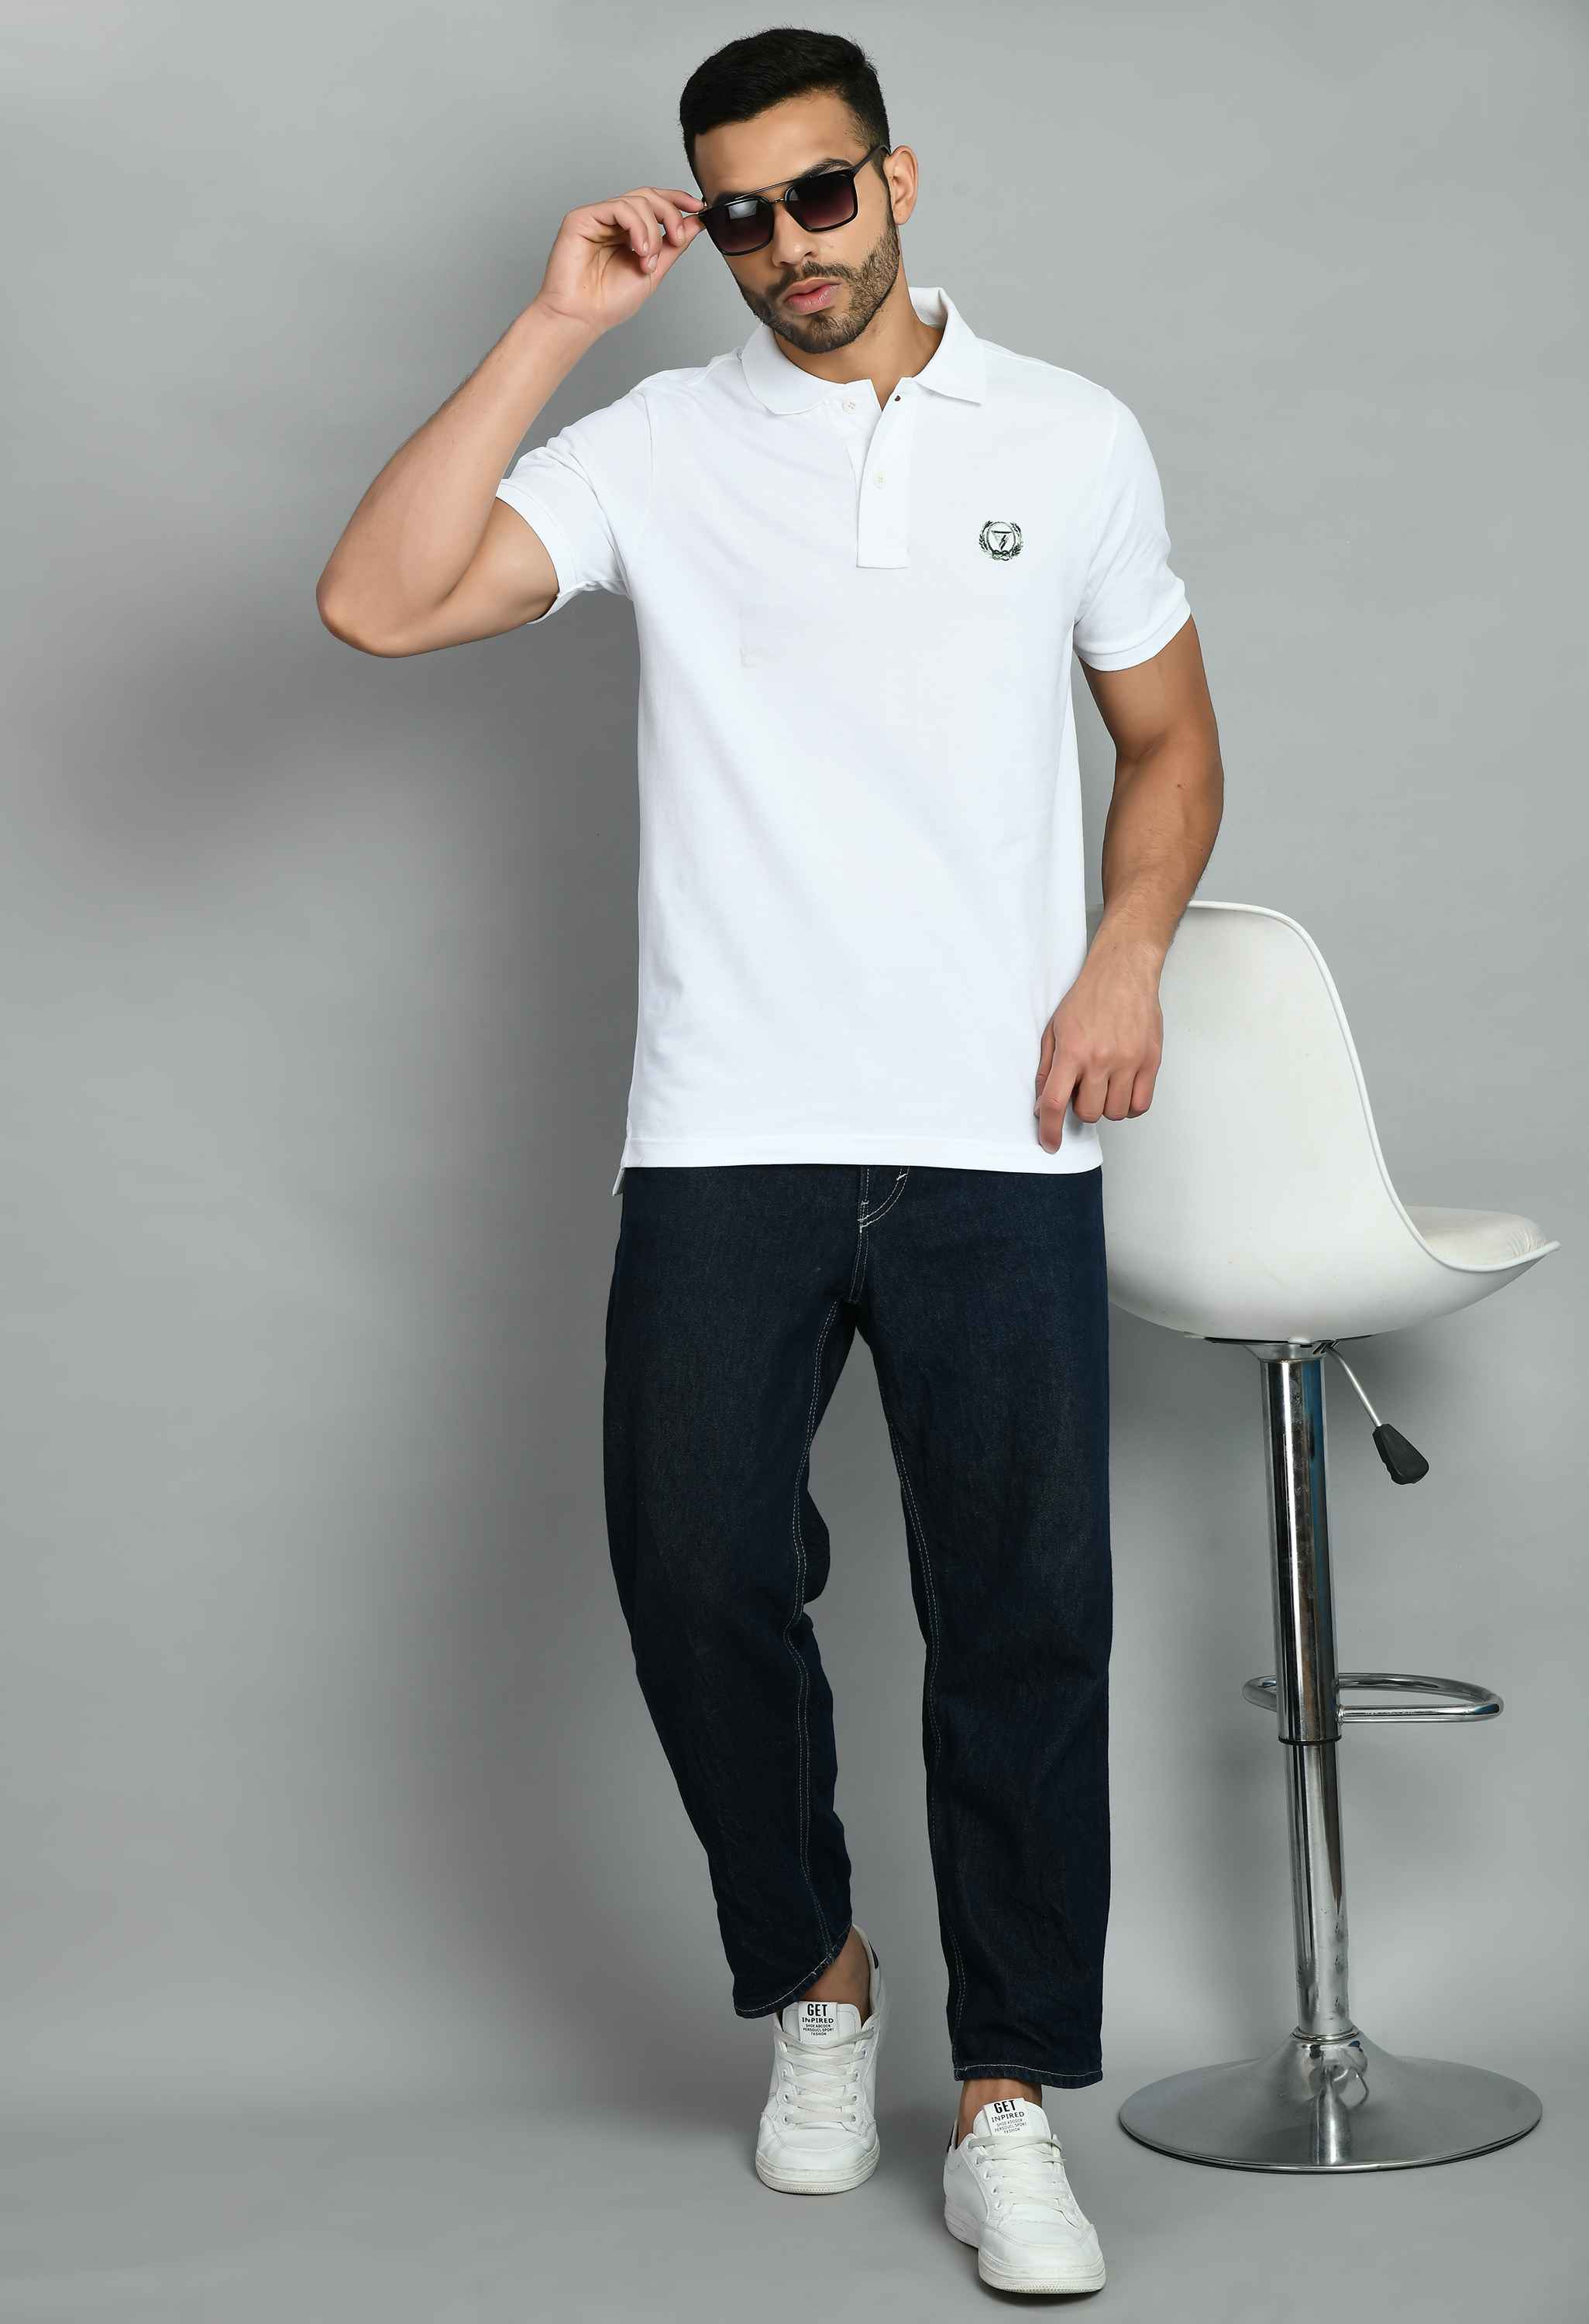 Men's Solid White Polo T-Shirt - SQUIREHOOD